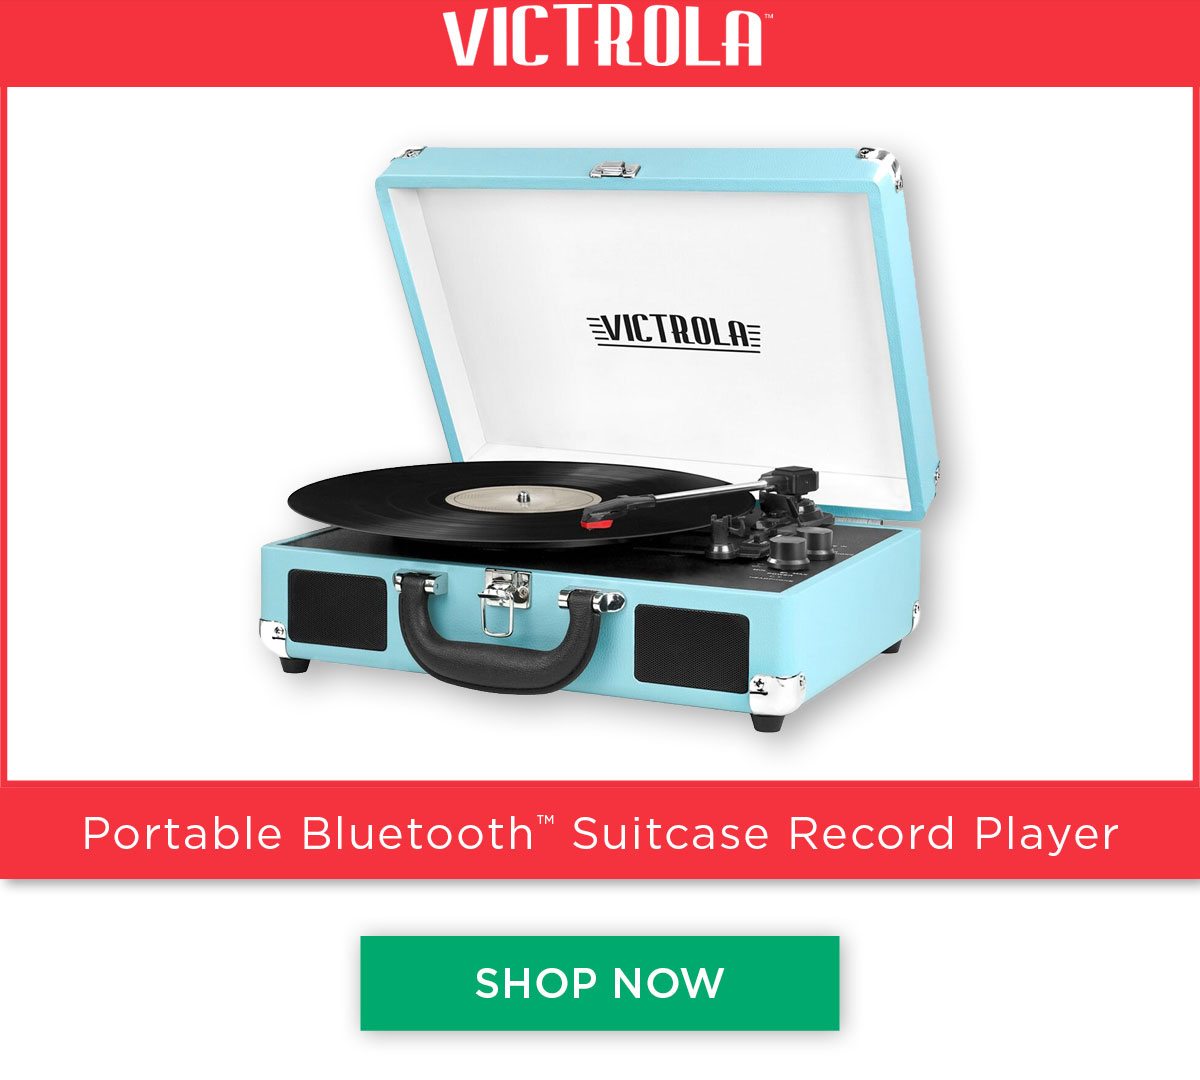 Victrola - Bluetooth Suitecase Record Player in Turquoise